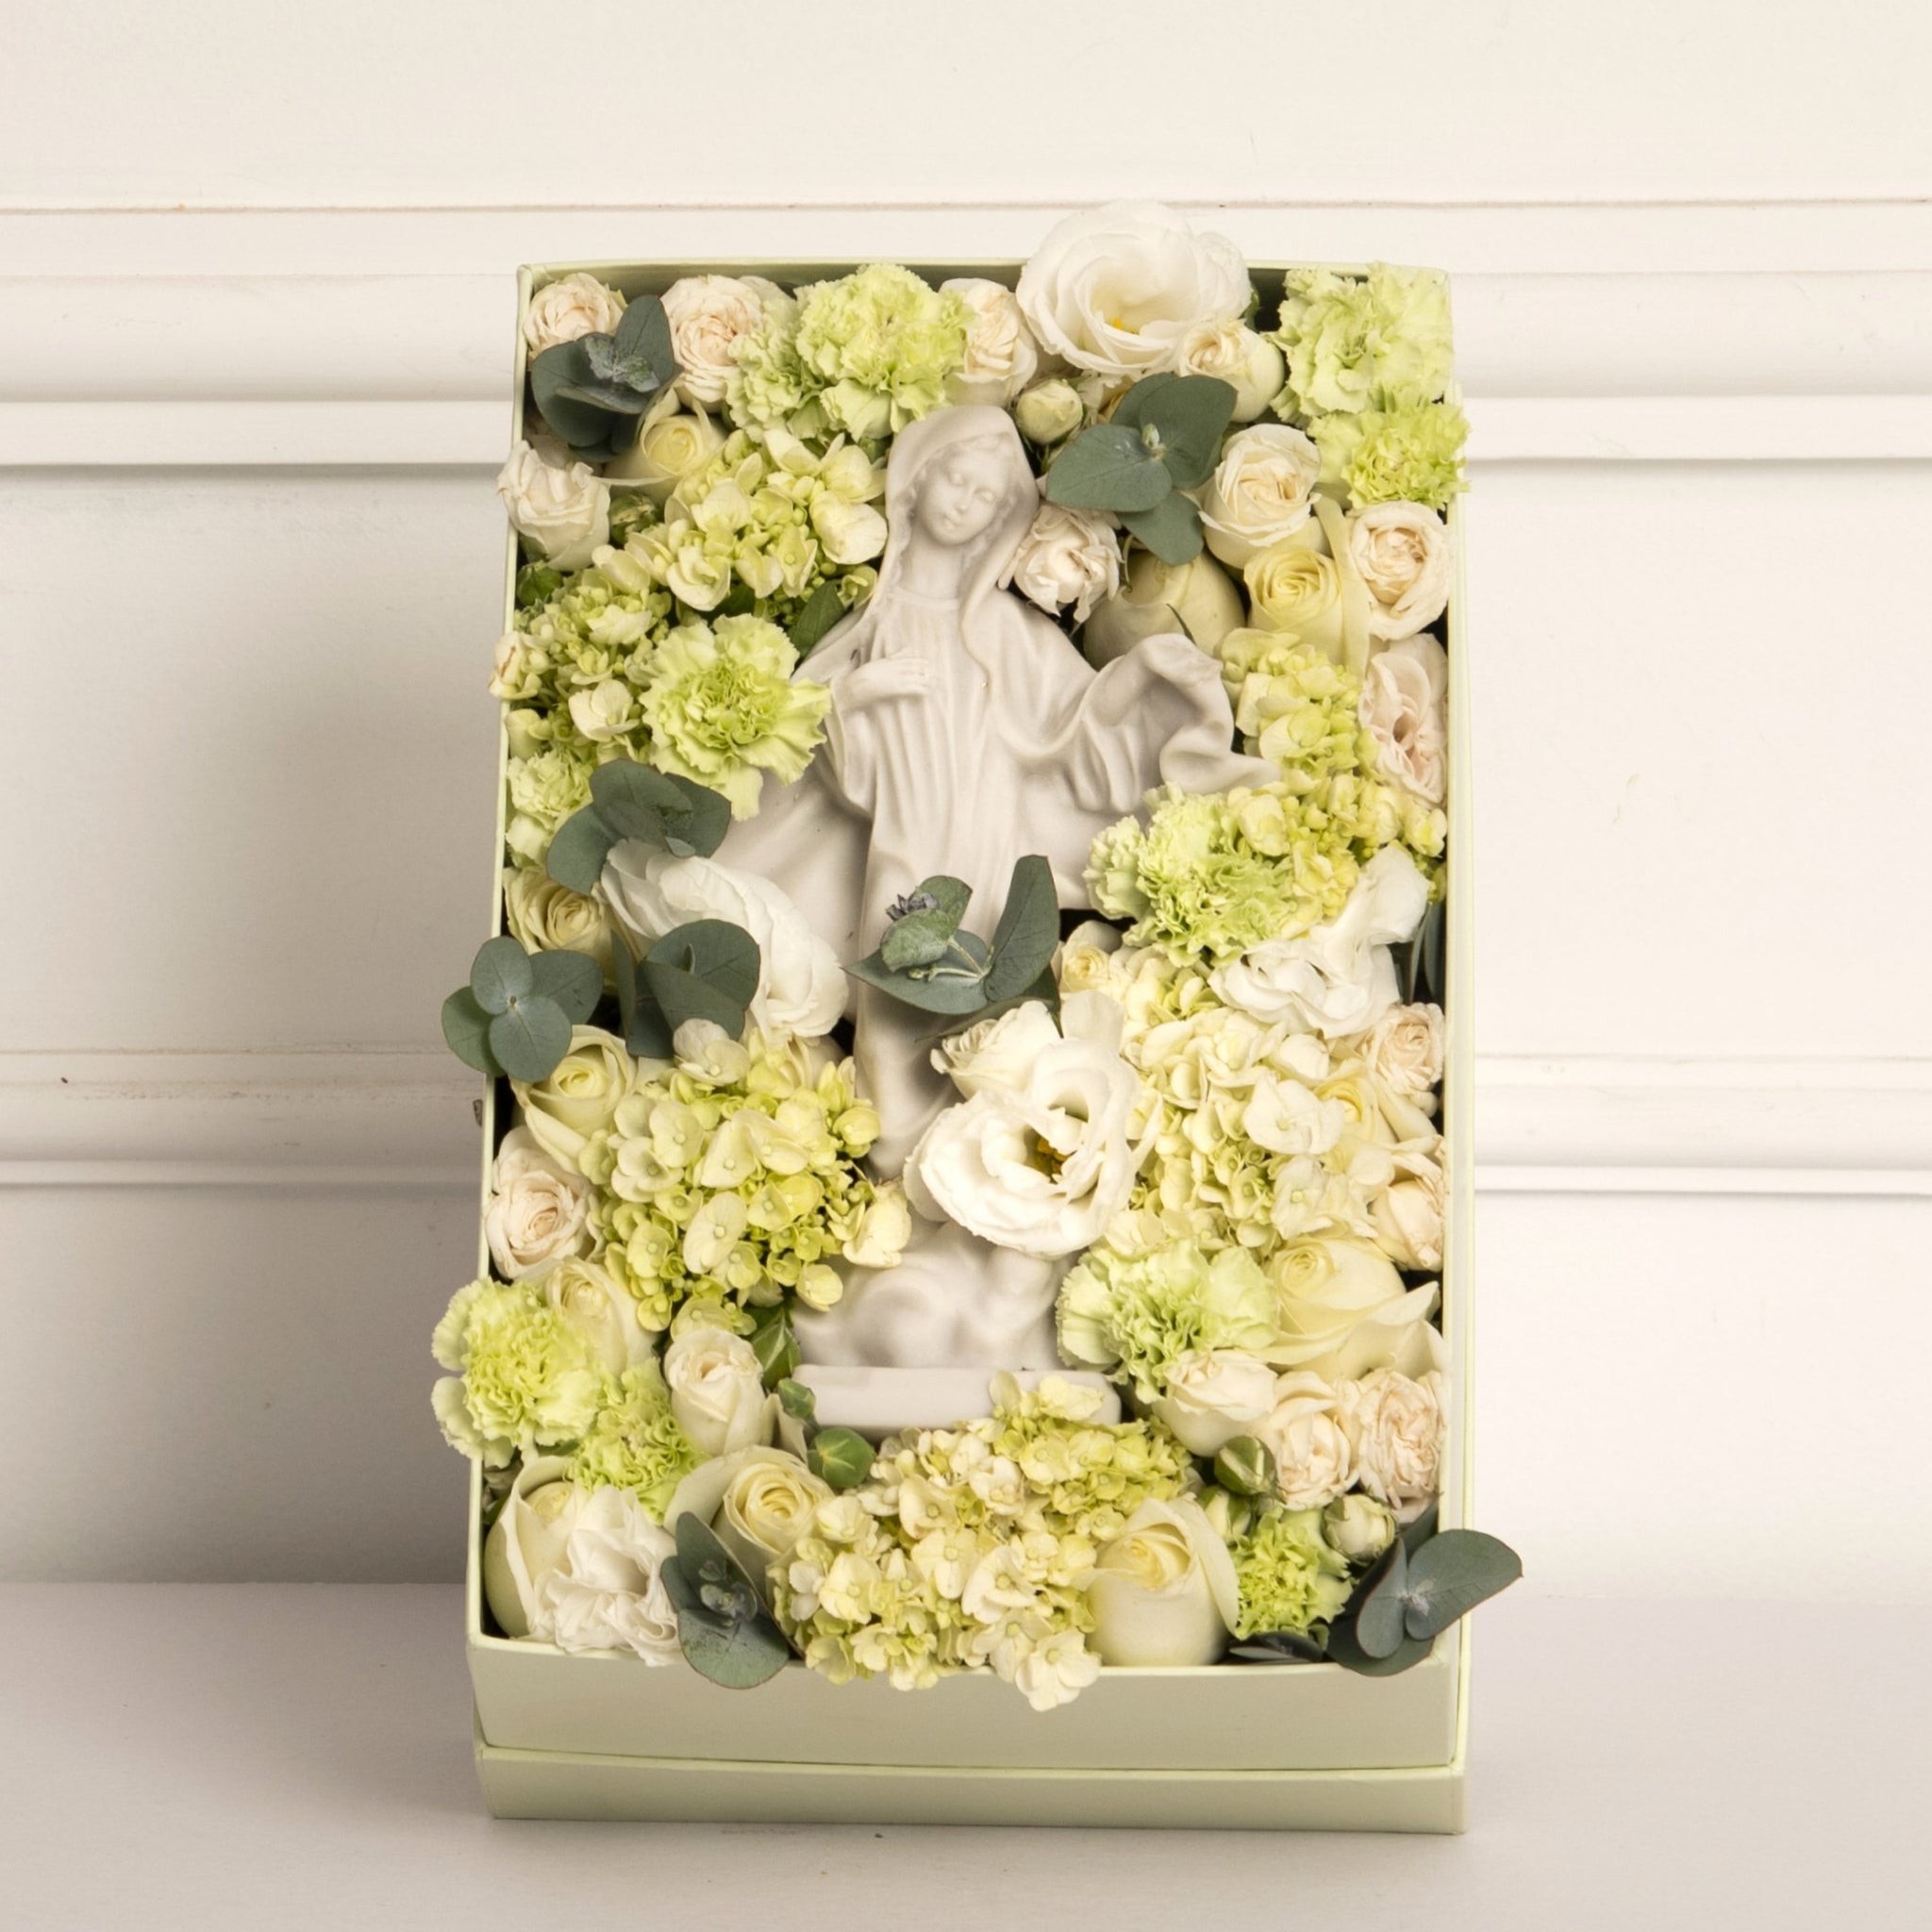 IMAGE OF OUR LADY IN THE BOX WITH FLOWERS